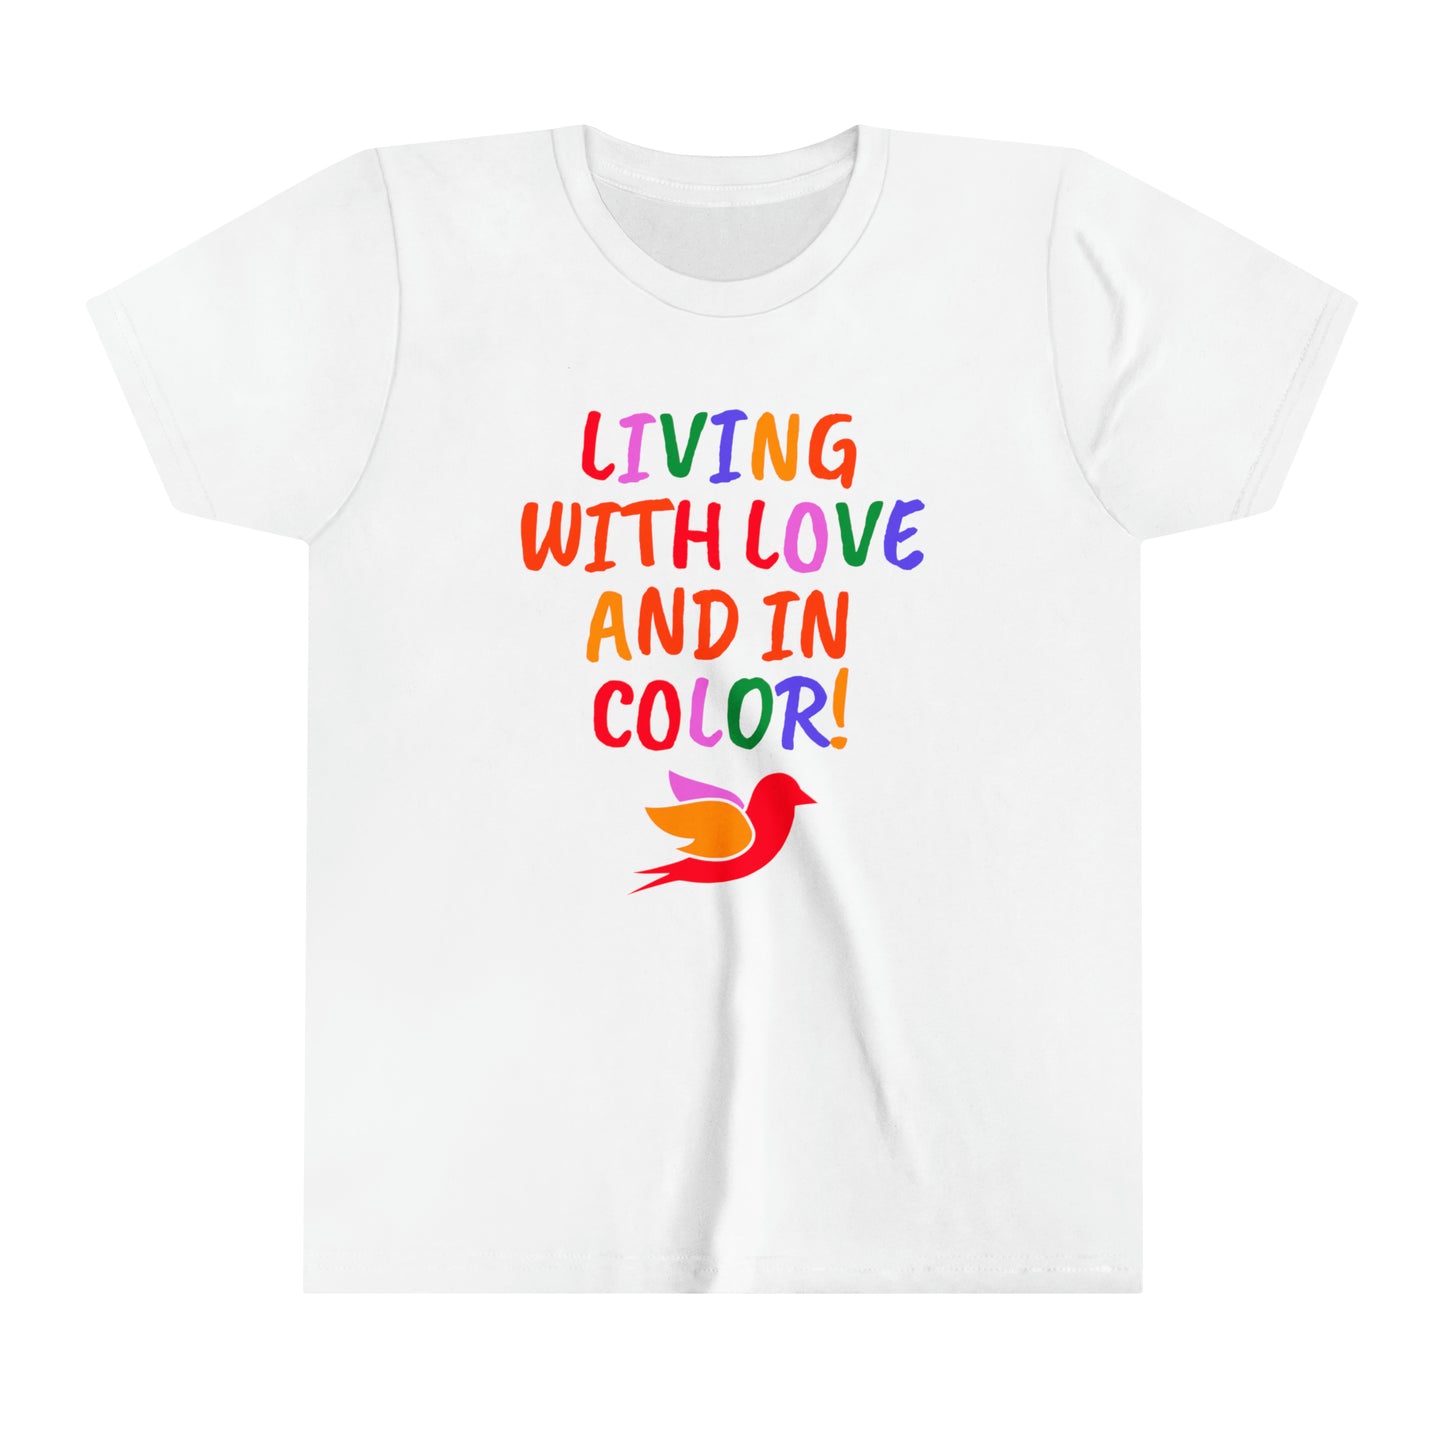 Love & Color Youth Short Sleeve Tee (10 colors)